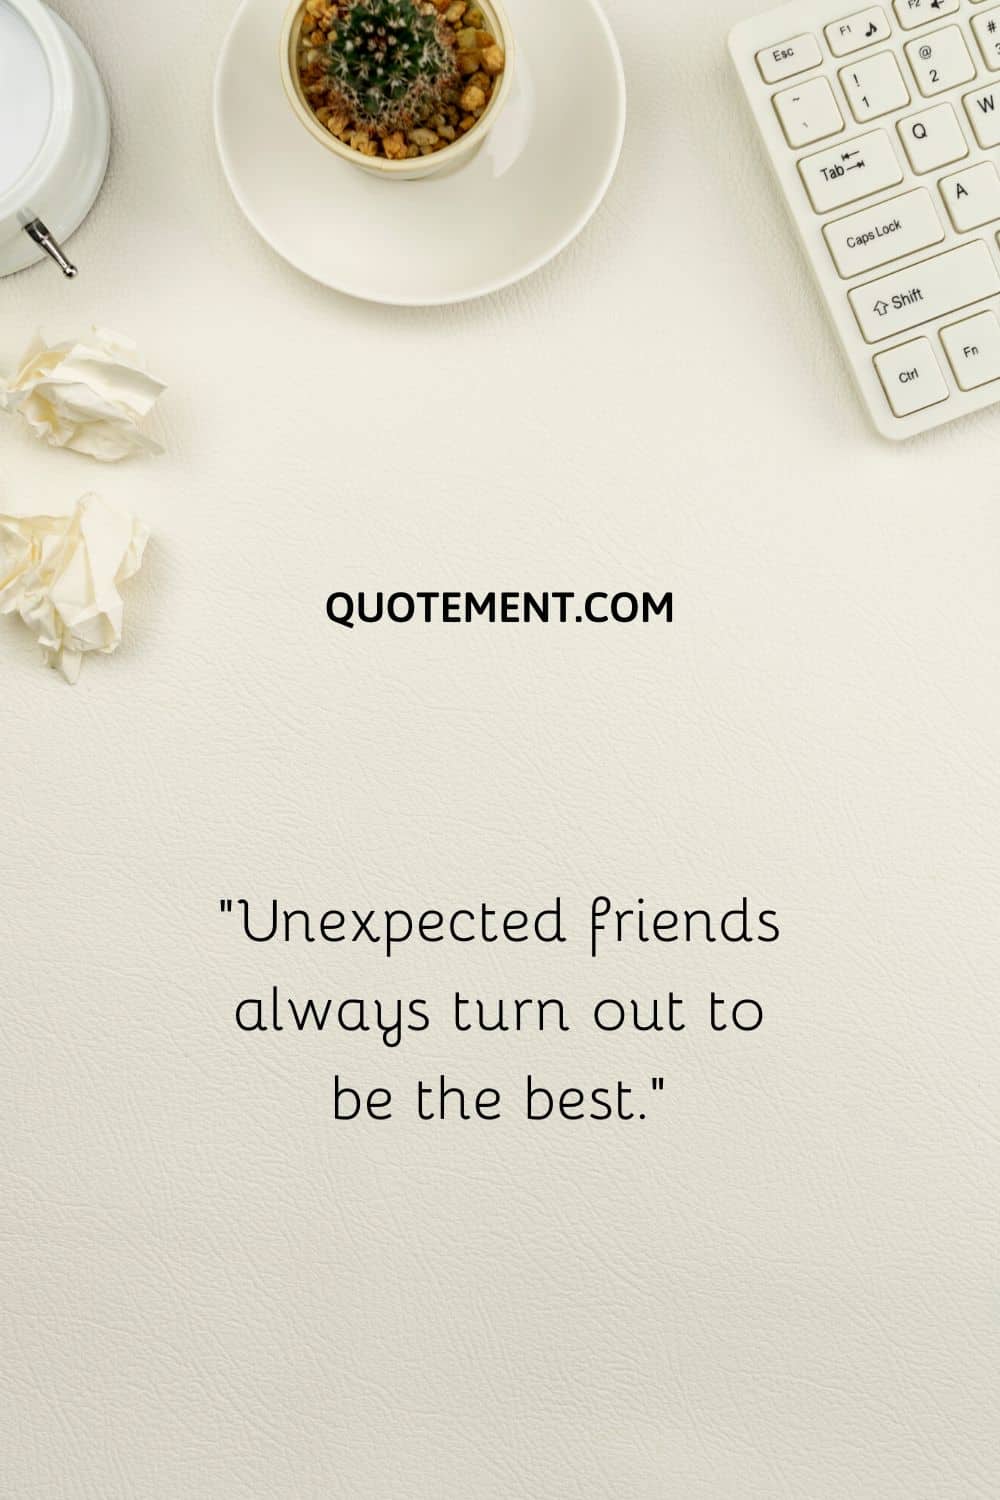 “Unexpected friends always turn out to be the best.”